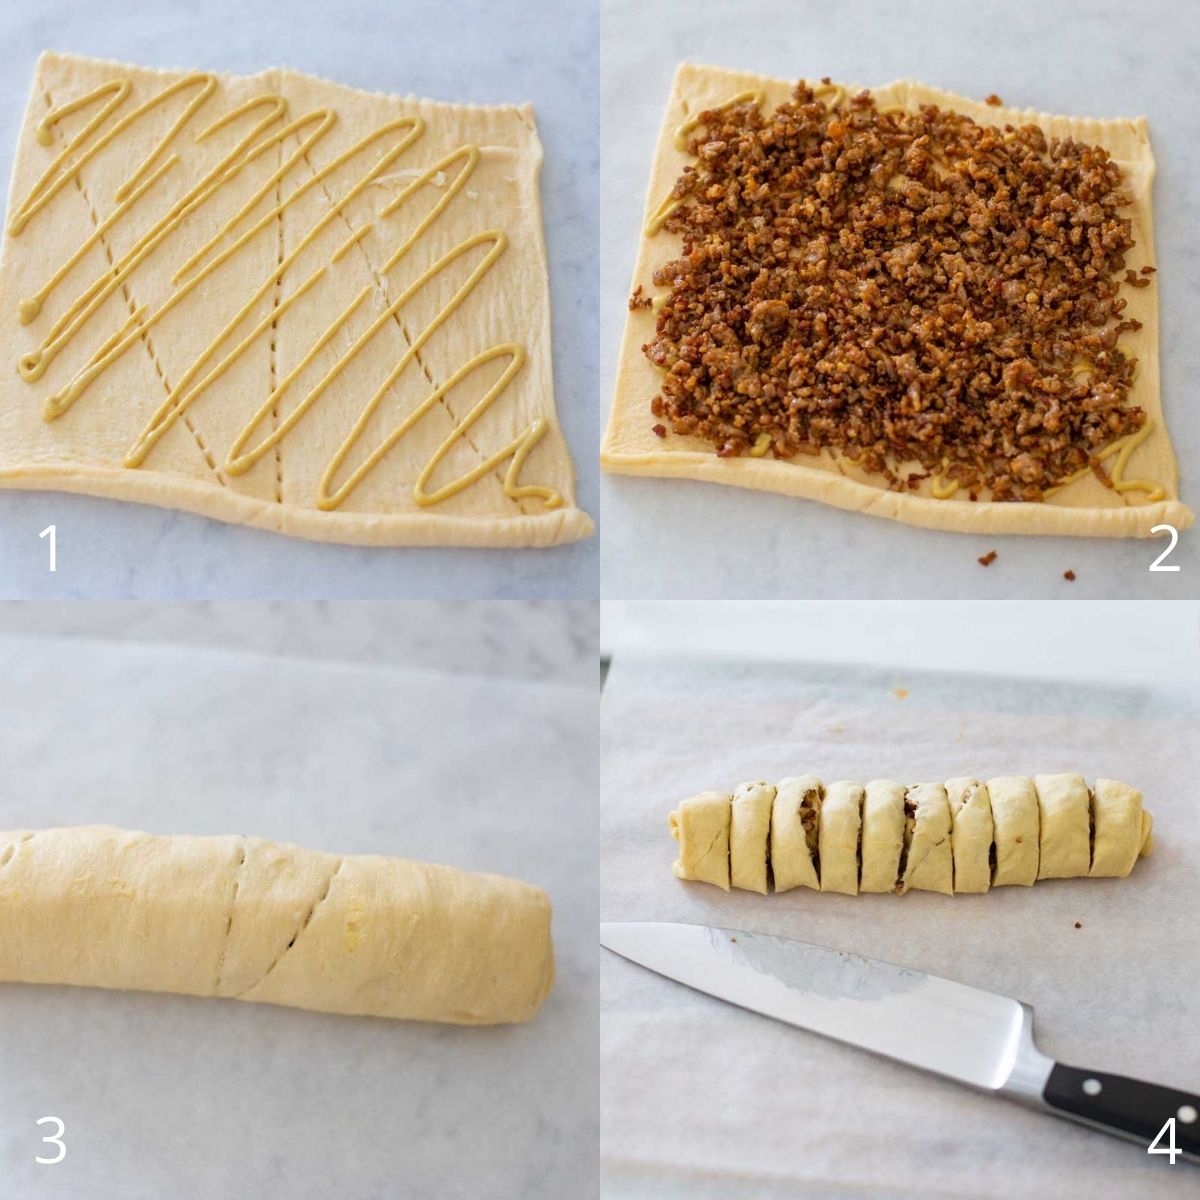 Step by step photos show how to assemble the sausage swirls.